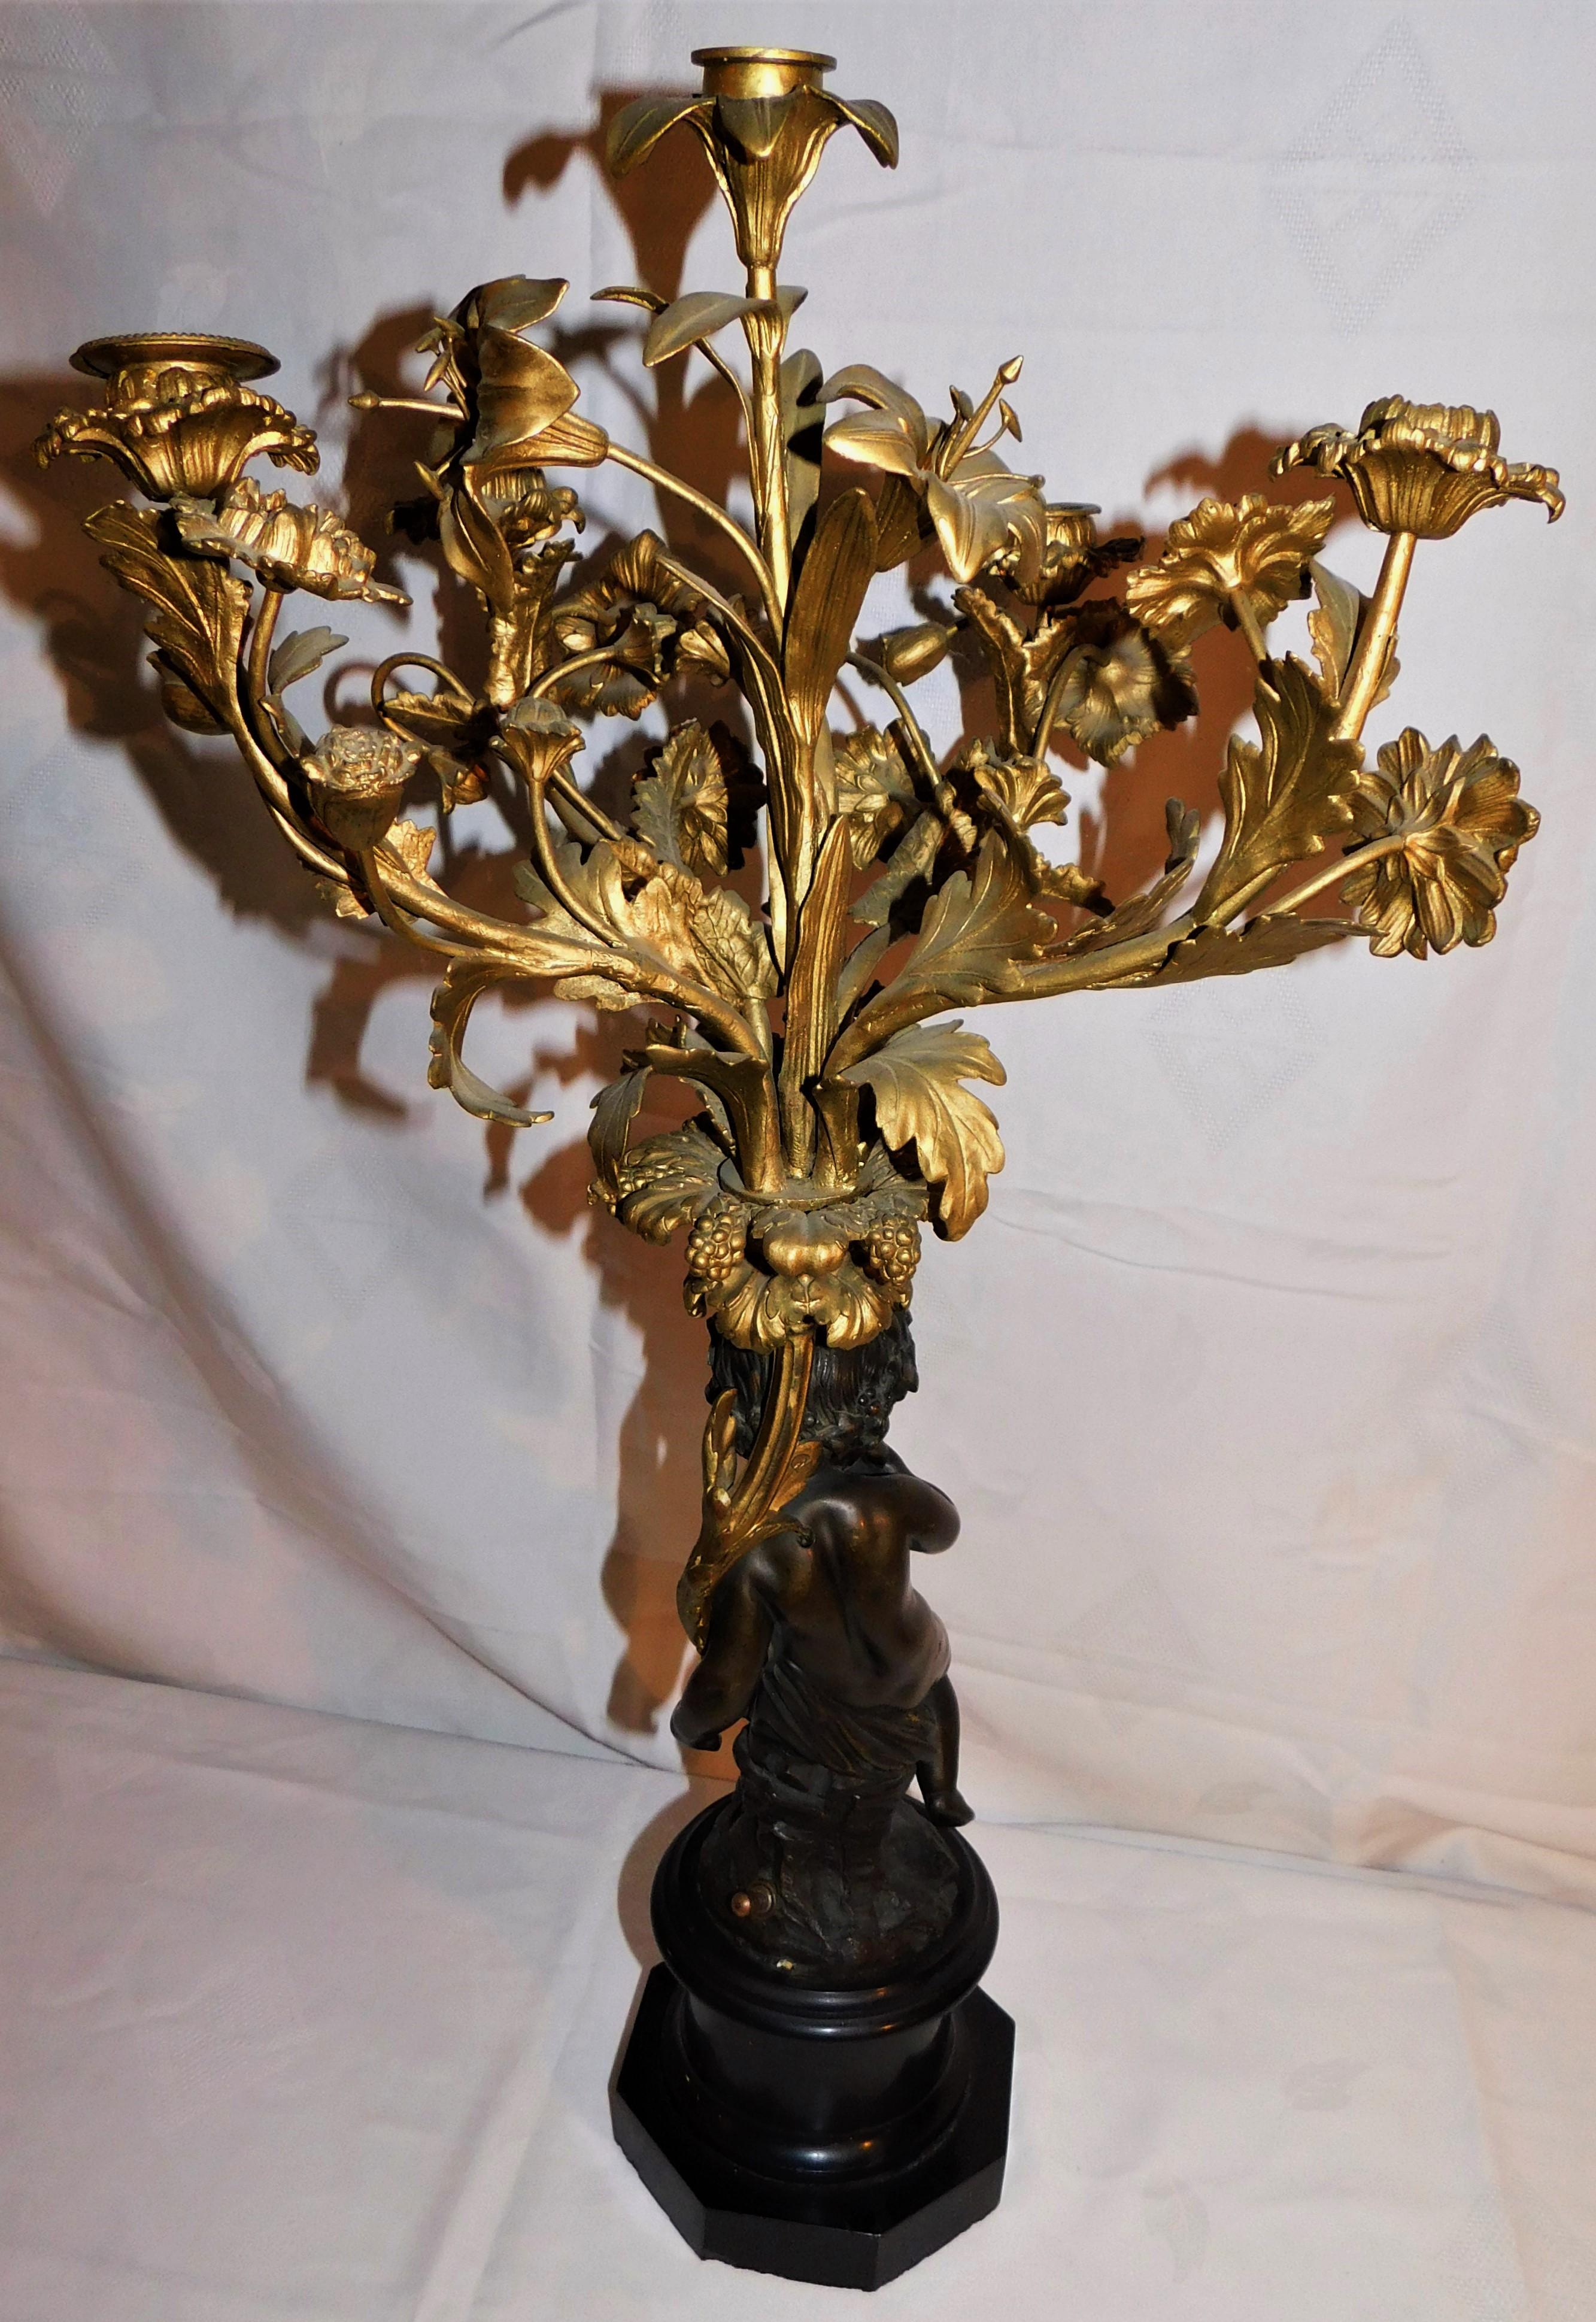 Pair of 19th Century French Gold Gilded Bronze Putti Cherubs Candelabras For Sale 2